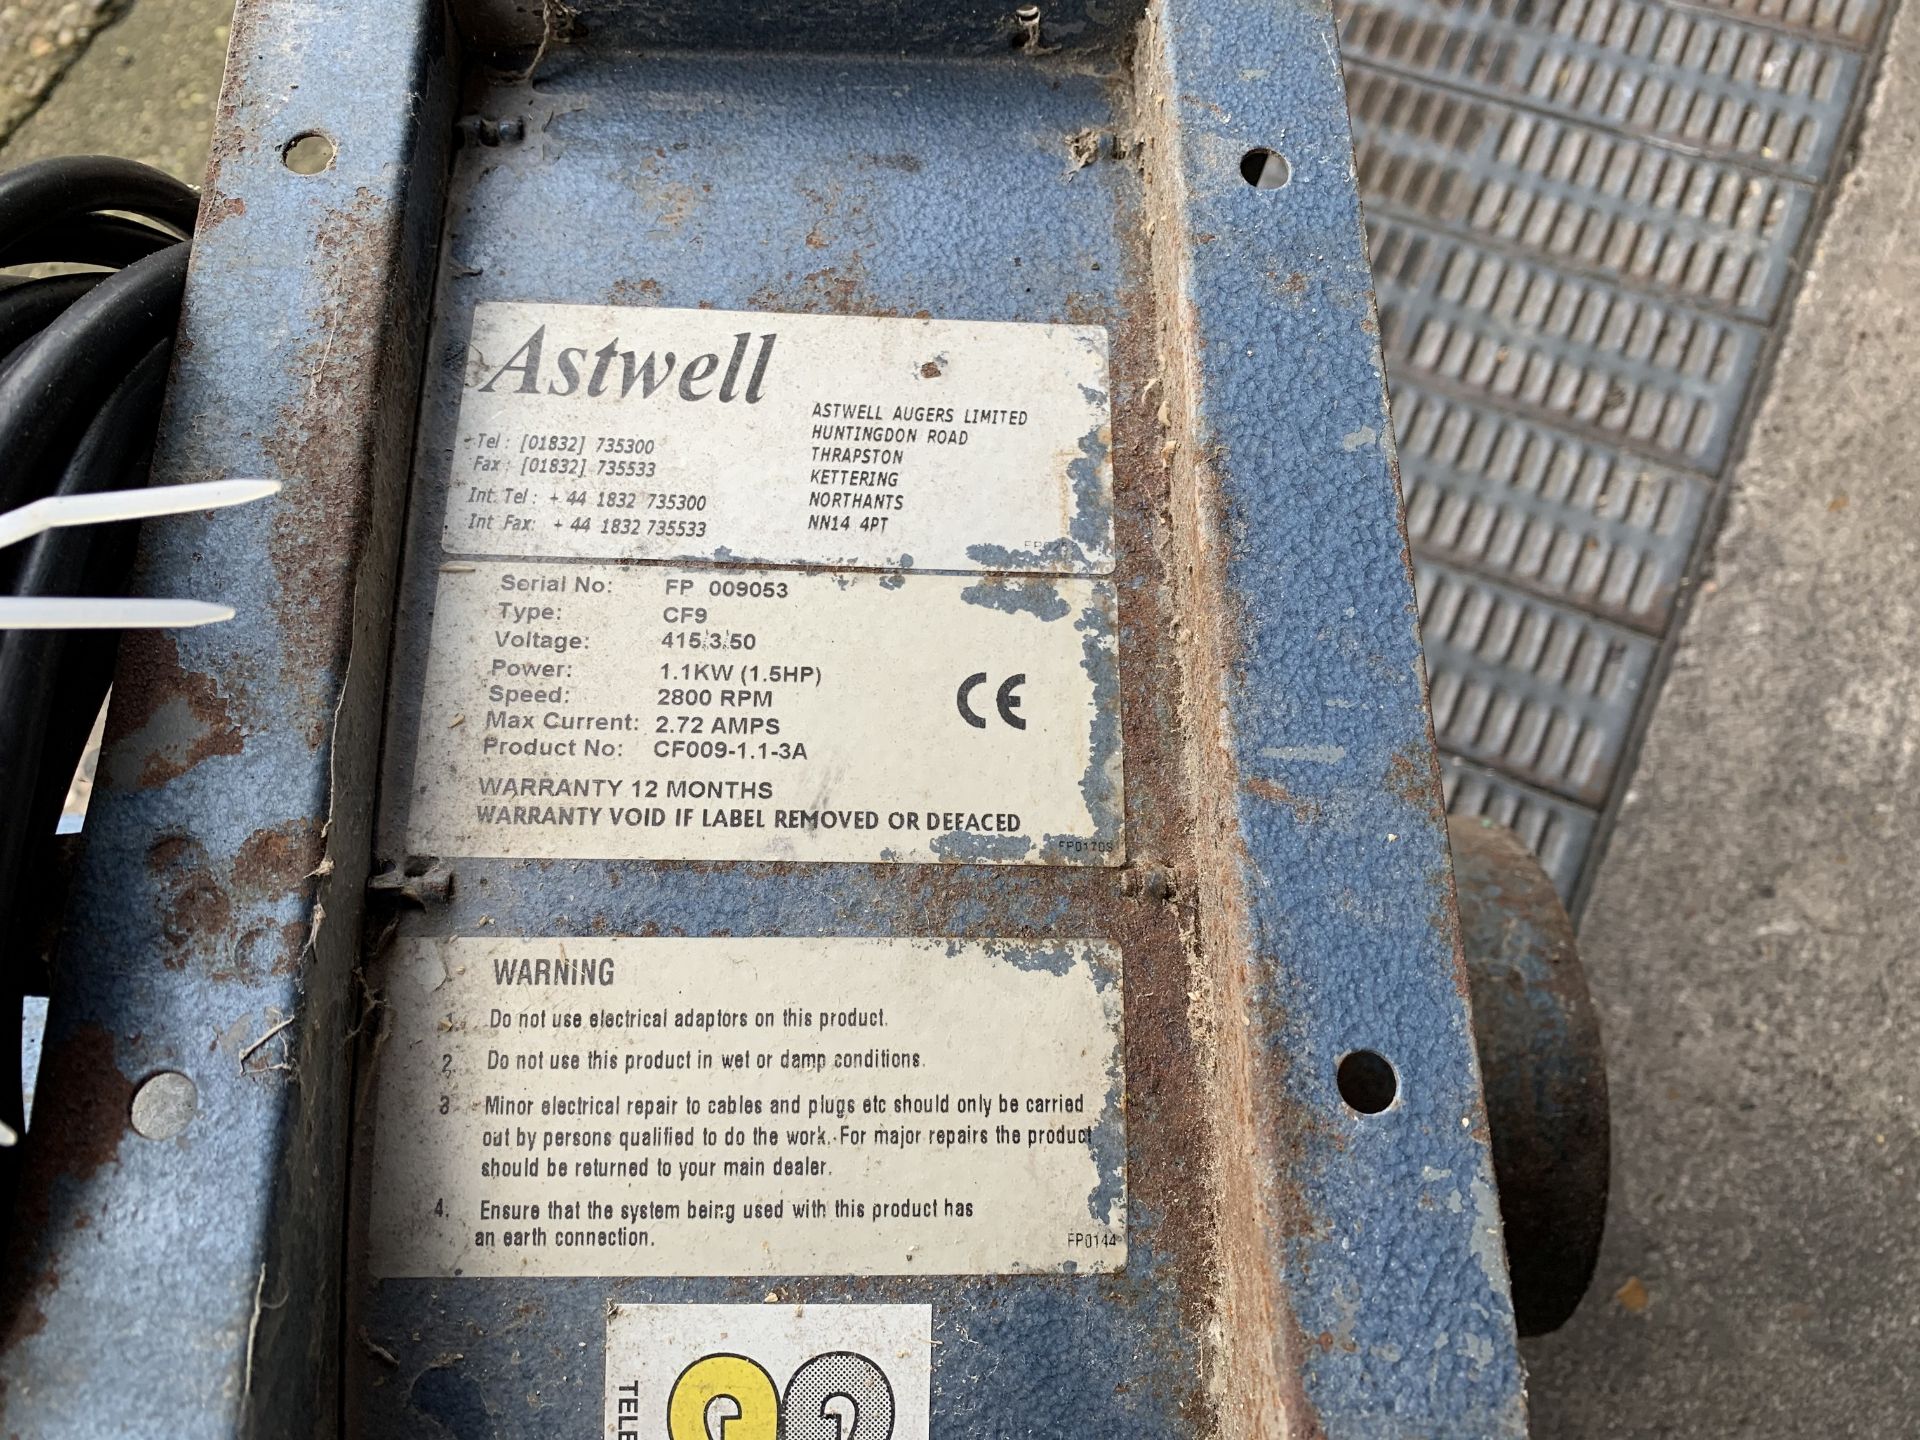 Astwell 3 phase blower - Image 2 of 2